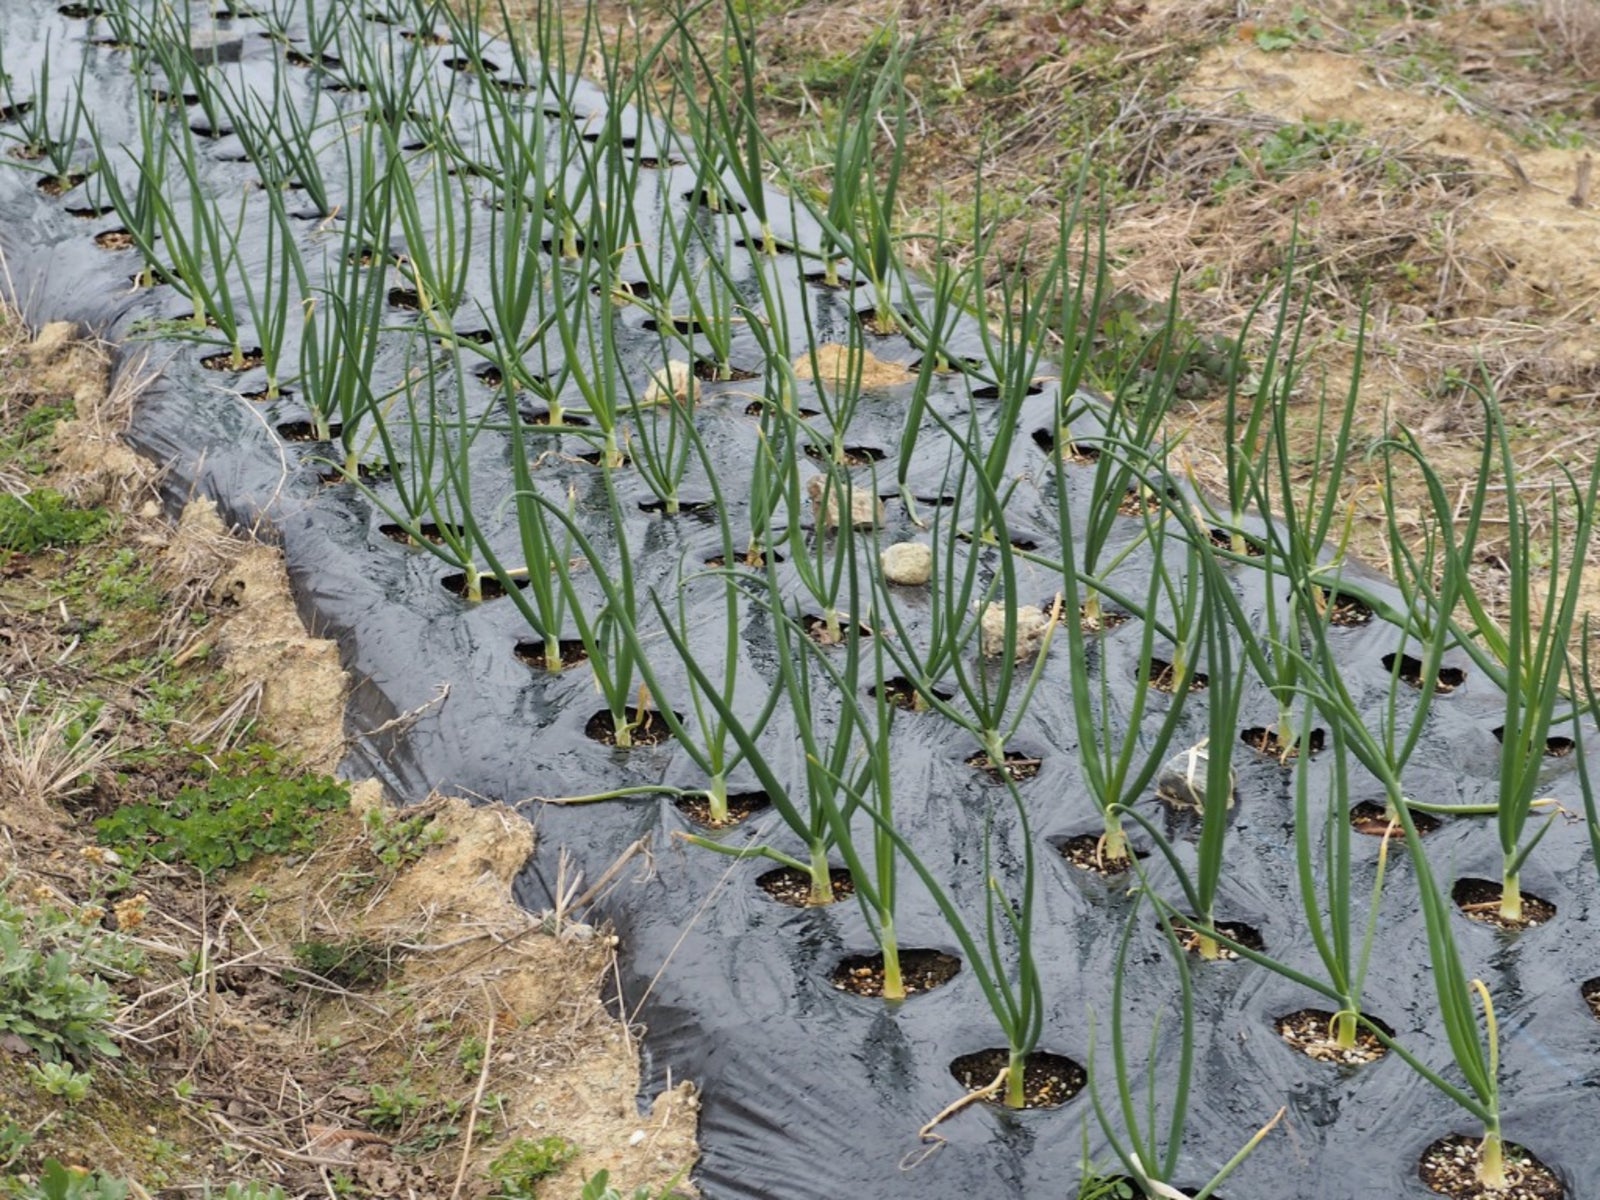 Weeds With Plastic Sheeting, Black Polythene Plastic Sheeting For Gardens